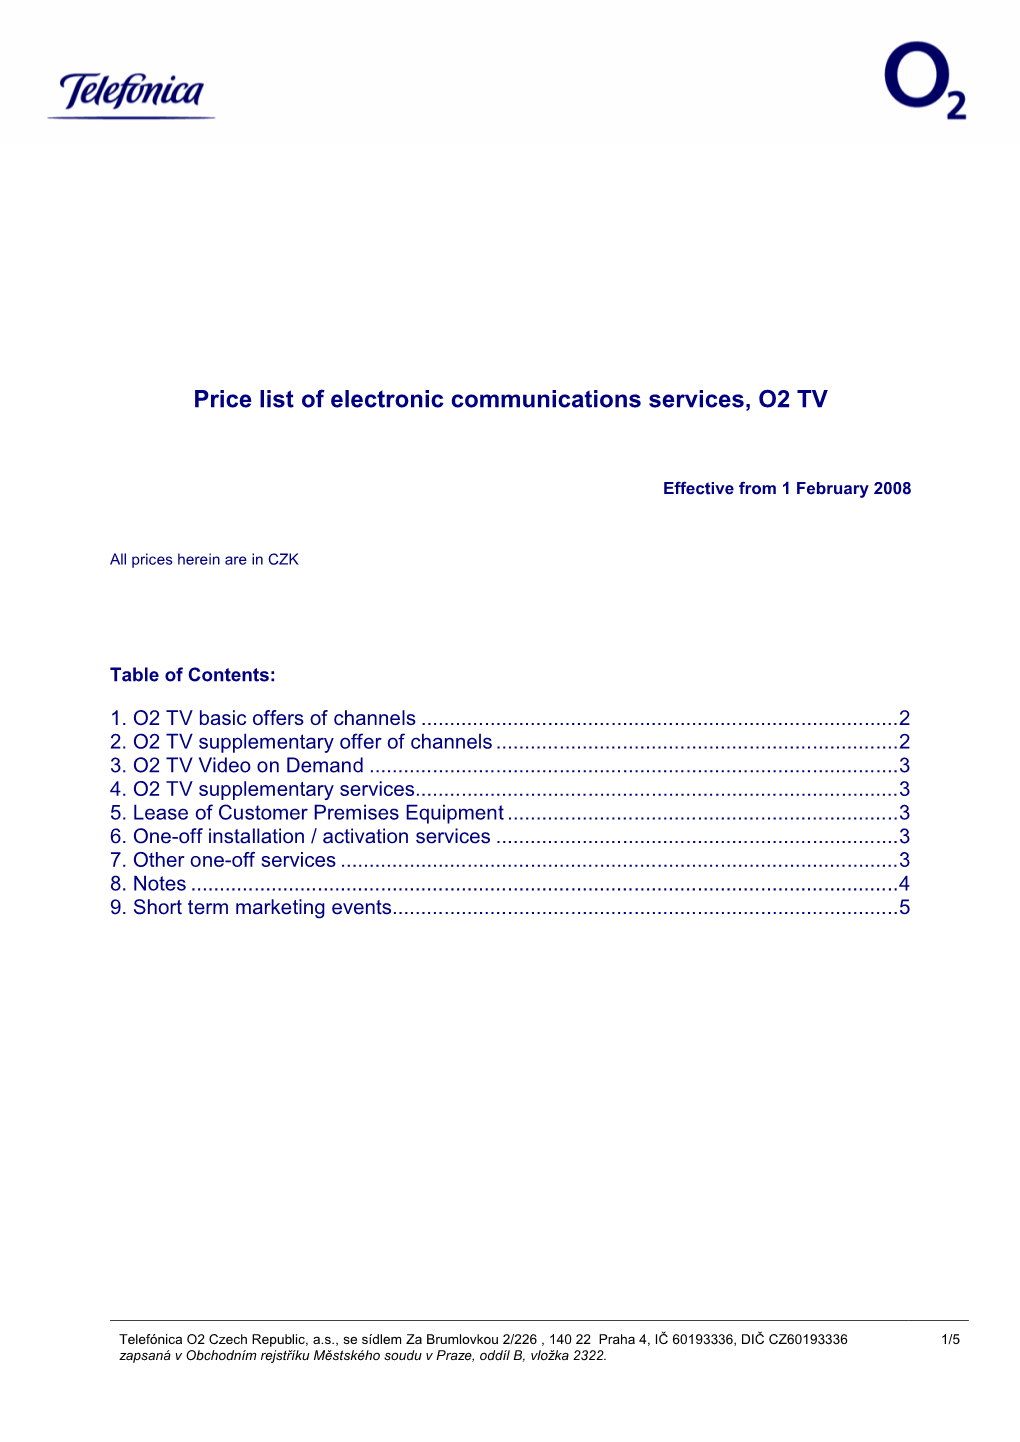 Price List of Electronic Communications Services, O2 TV